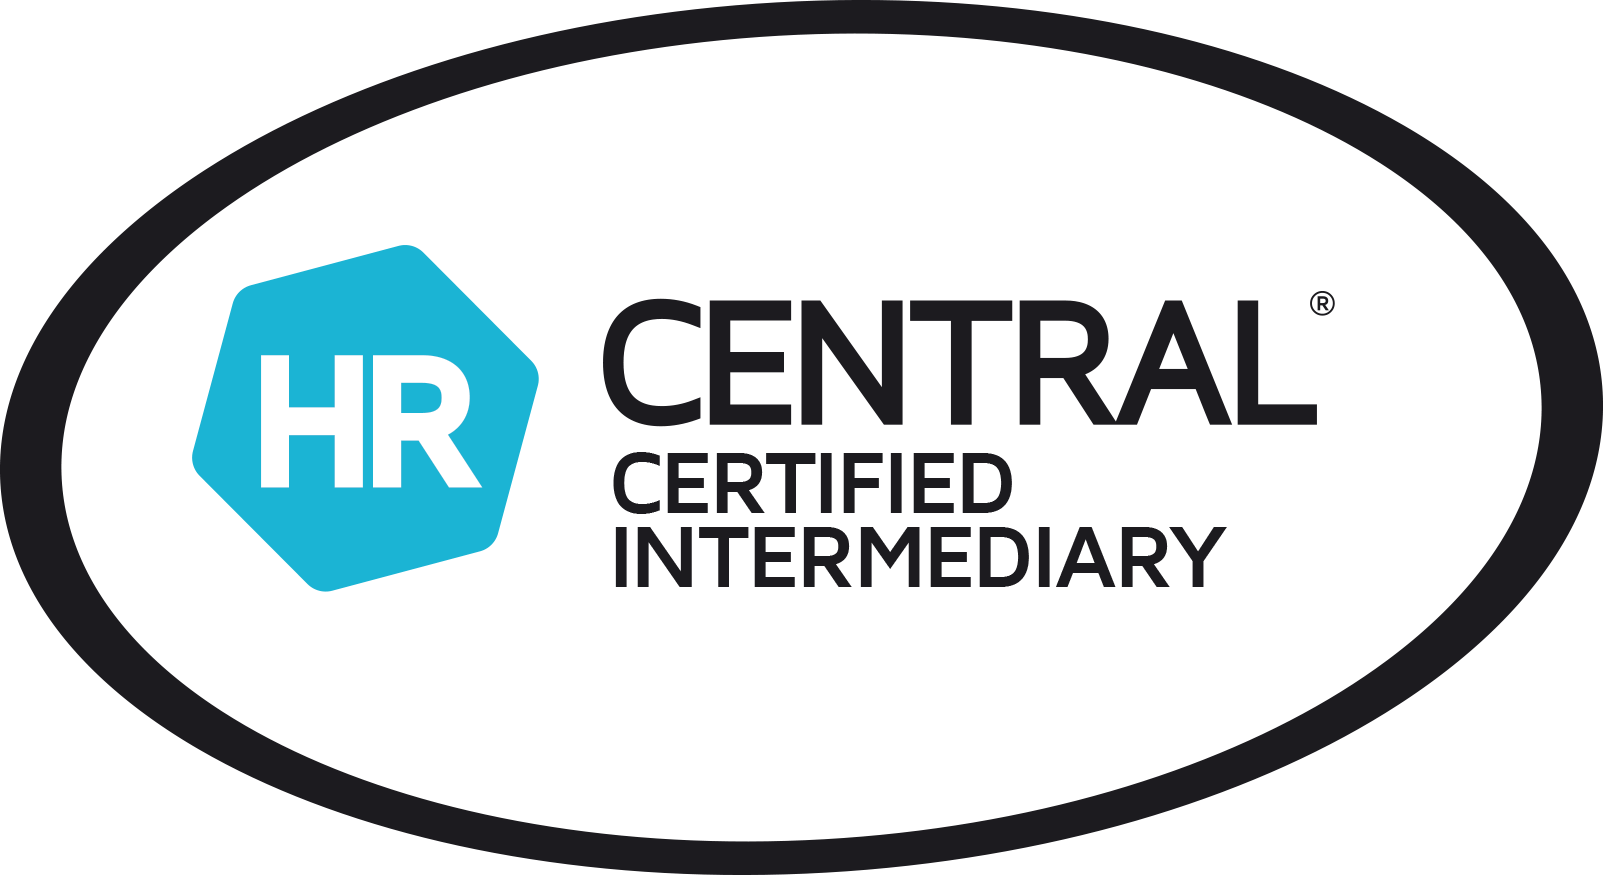 HR Central Certified Intermediary